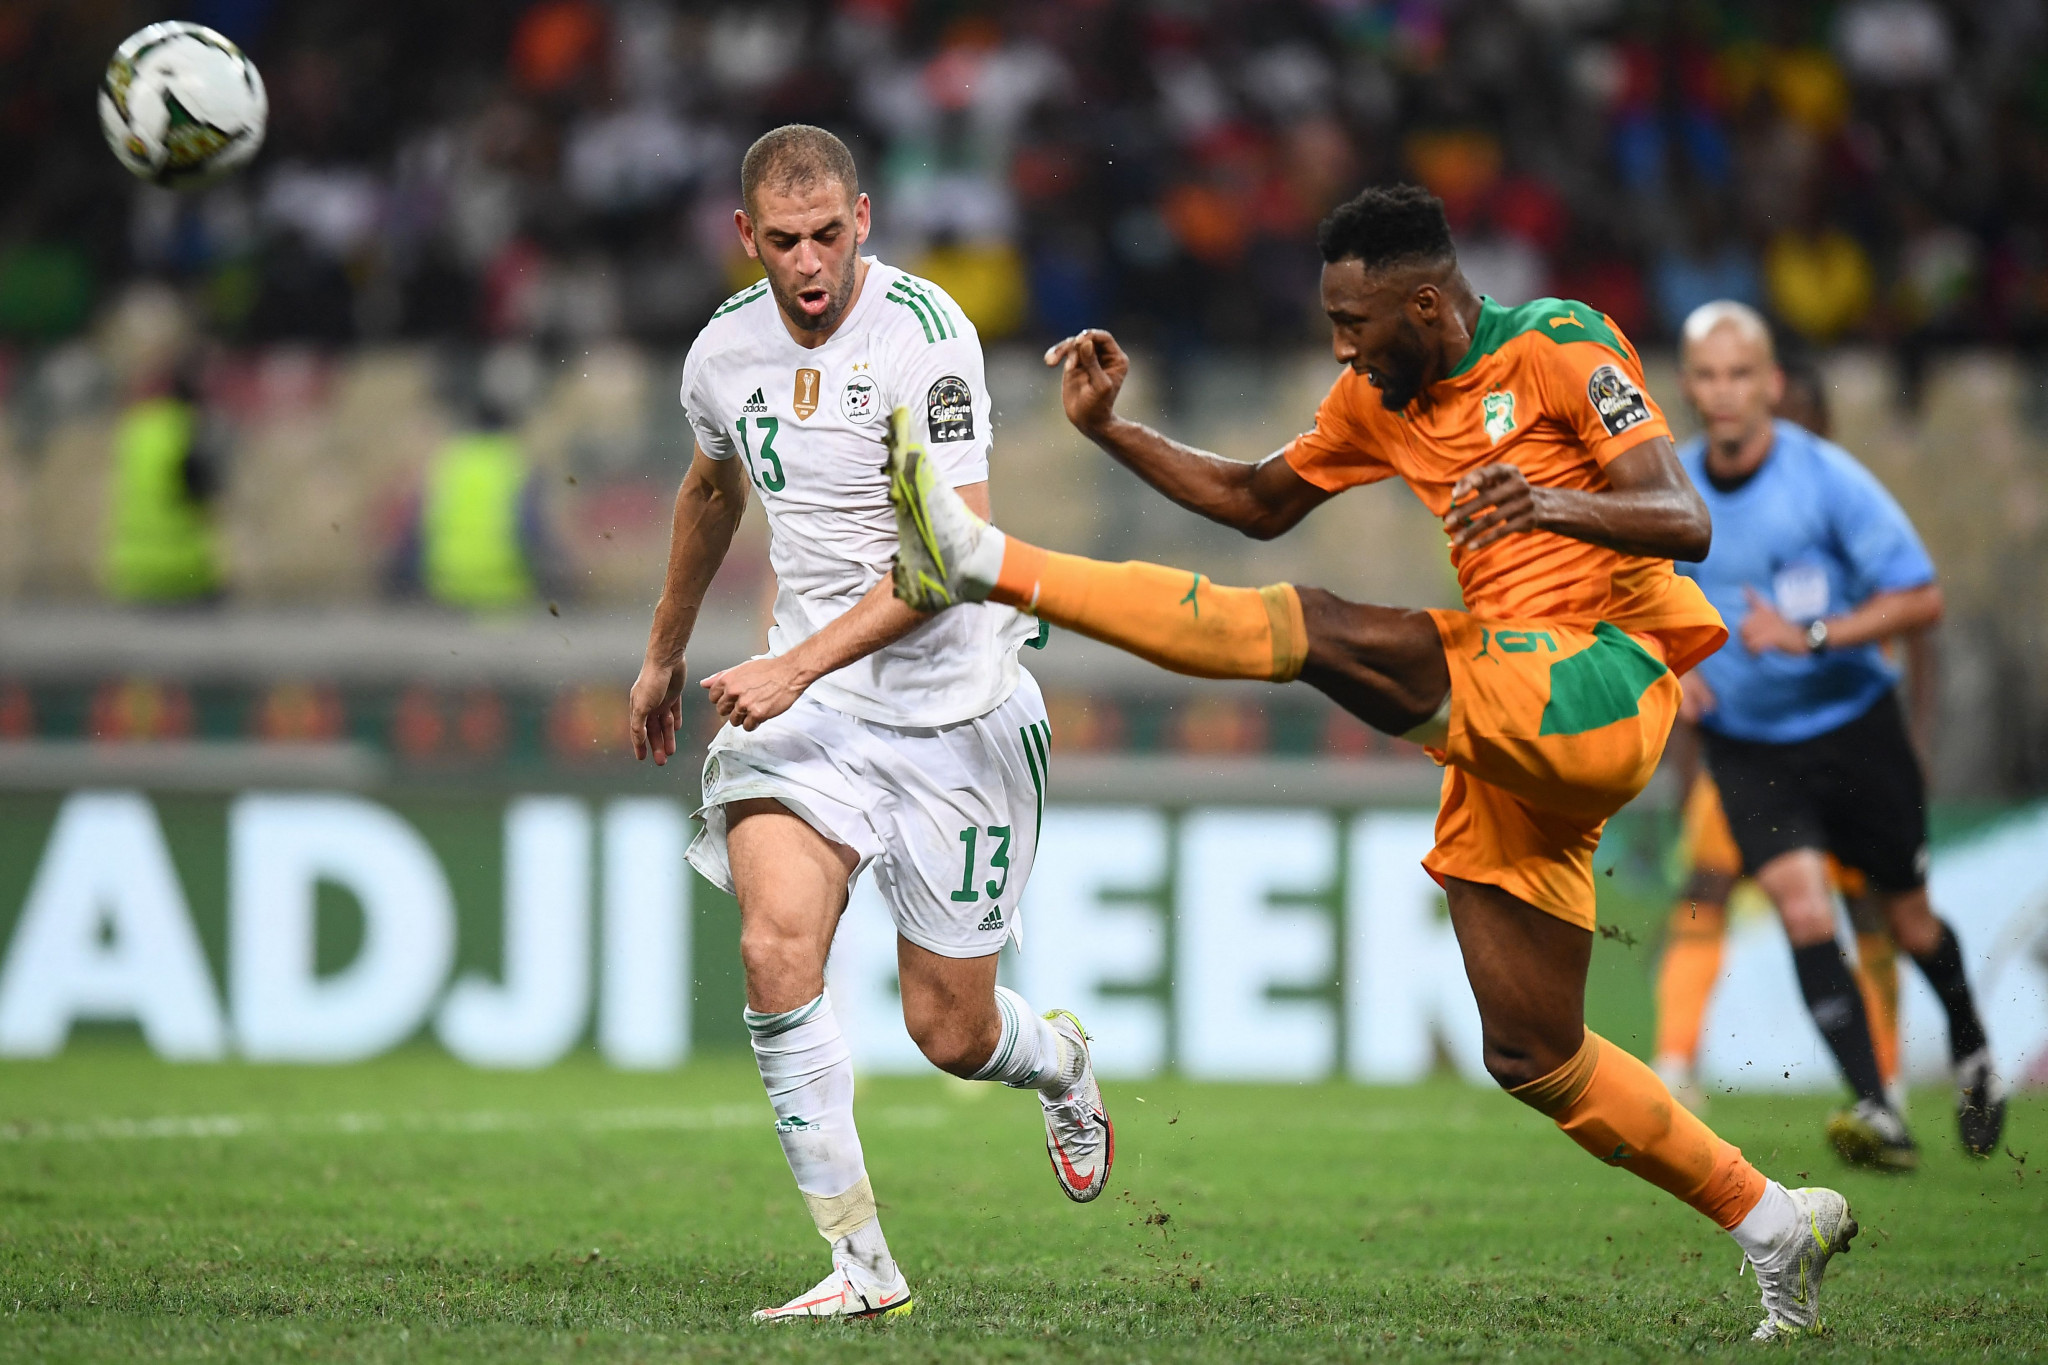 Holders Algeria knocked out of football’s Africa Cup of Nations at group stage